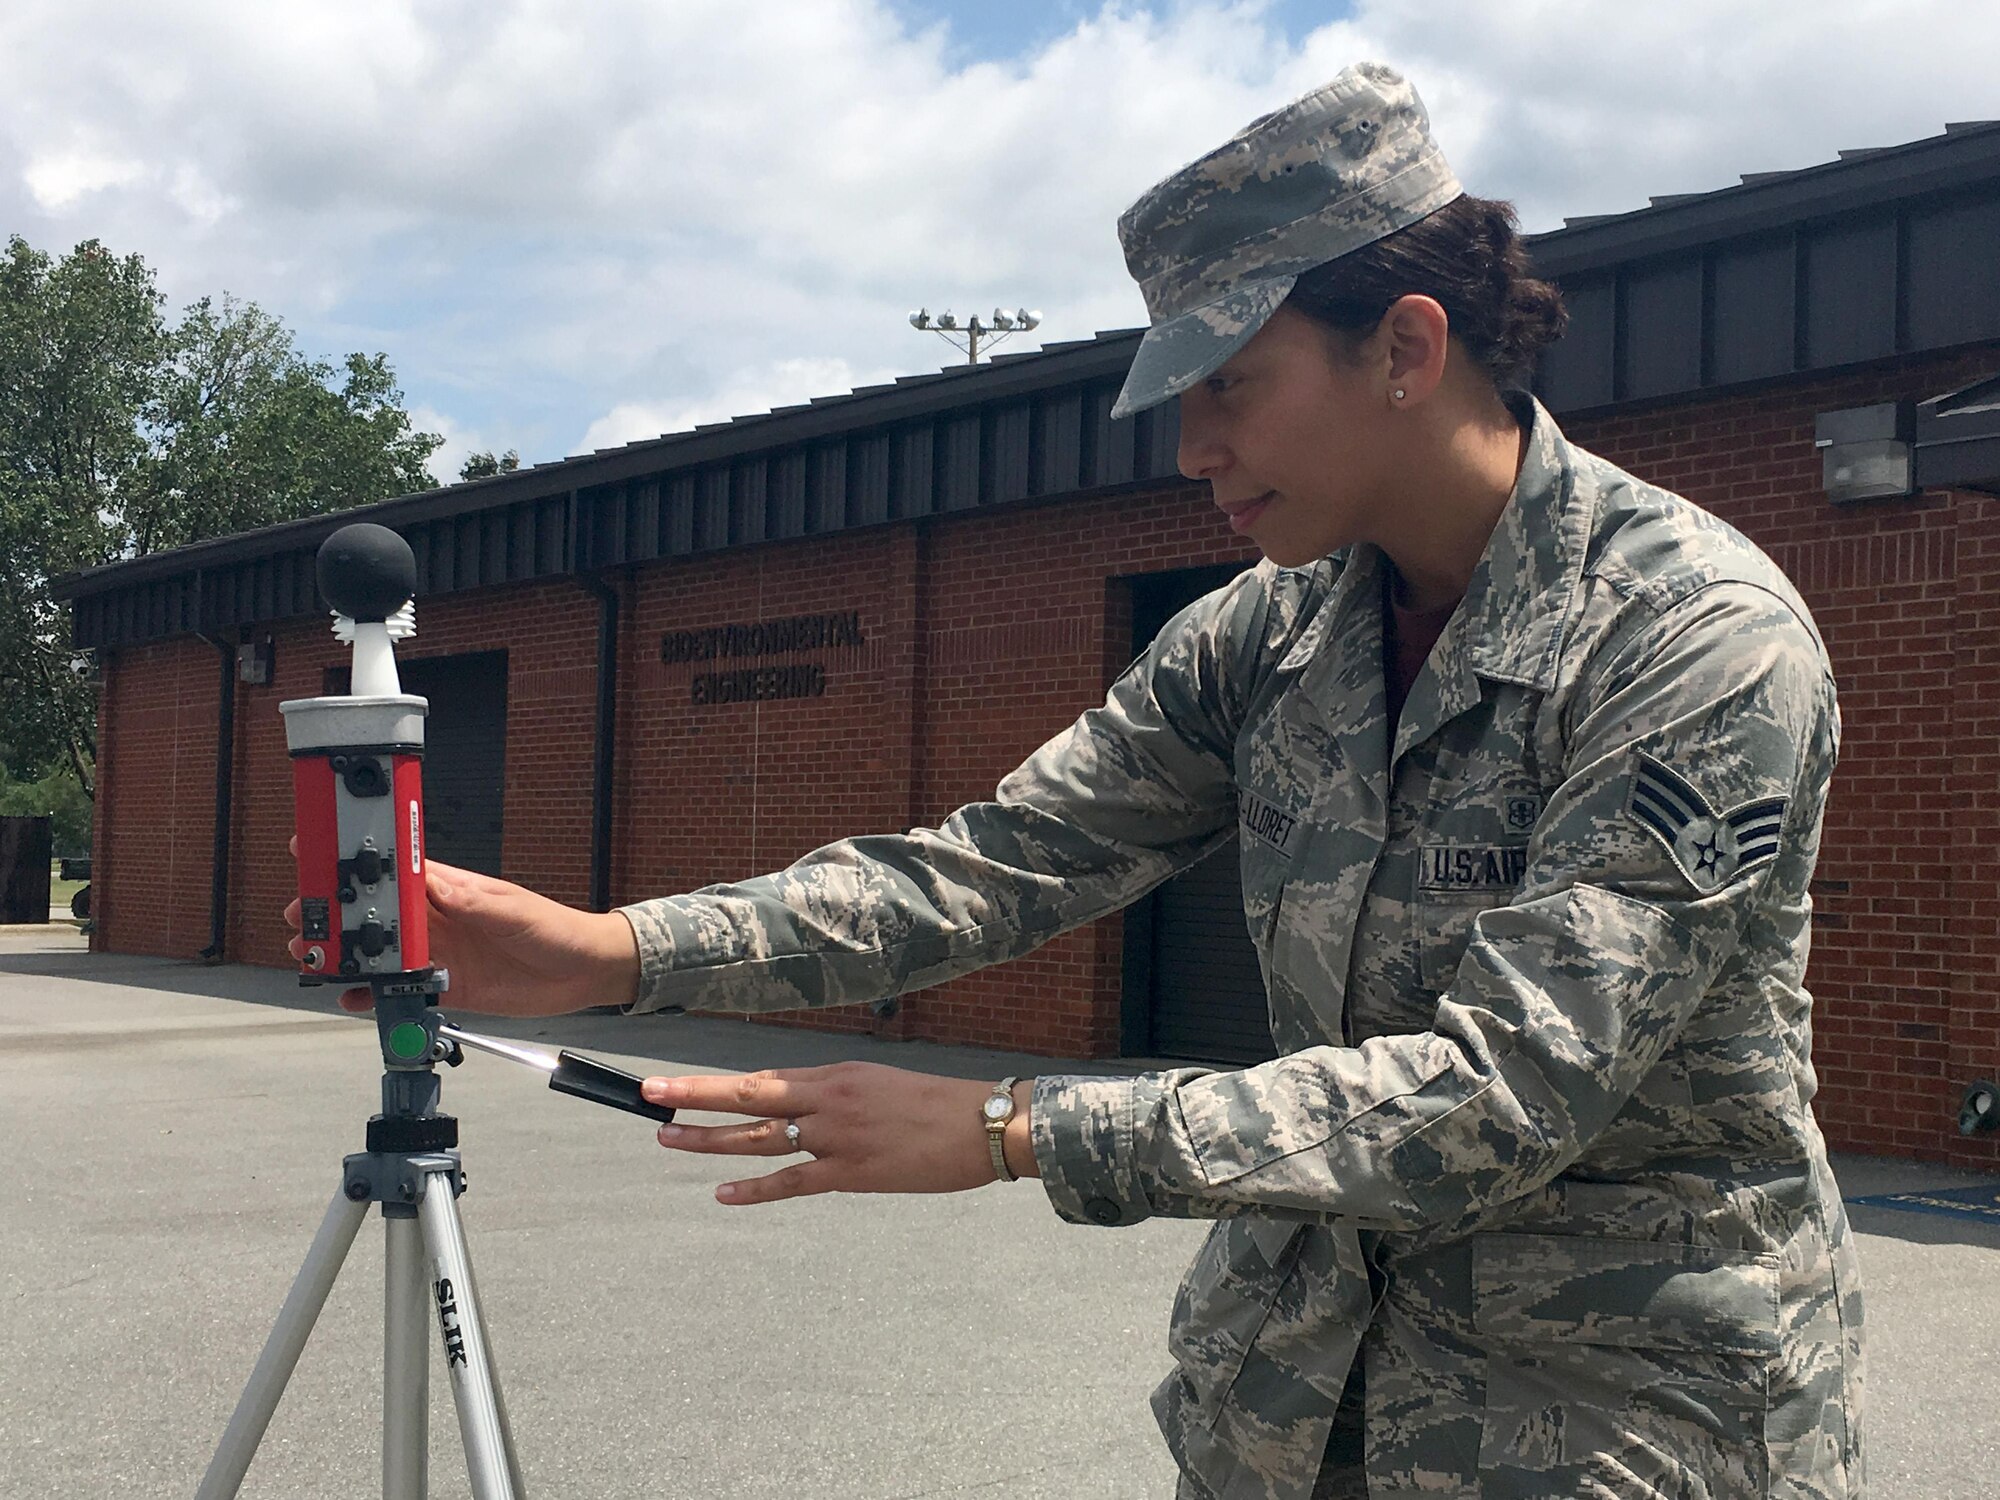 Senior Airman Amanda Vasquez-Lloret, a 4th Aerospace Medicine Squadron bioenvironmental engineering specialist, checks readings on a Web Bulb Globe Temperature heat stress monitor, June 17, 2016, at Seymour Johnson Air Force Base, North Carolina. The 4th AMDS bioenvironmental engineering flight monitors humidity, air temperature and radiant heat effects to determine heat stress risk flag categories and work/rest cycles. (Courtesy Photo)